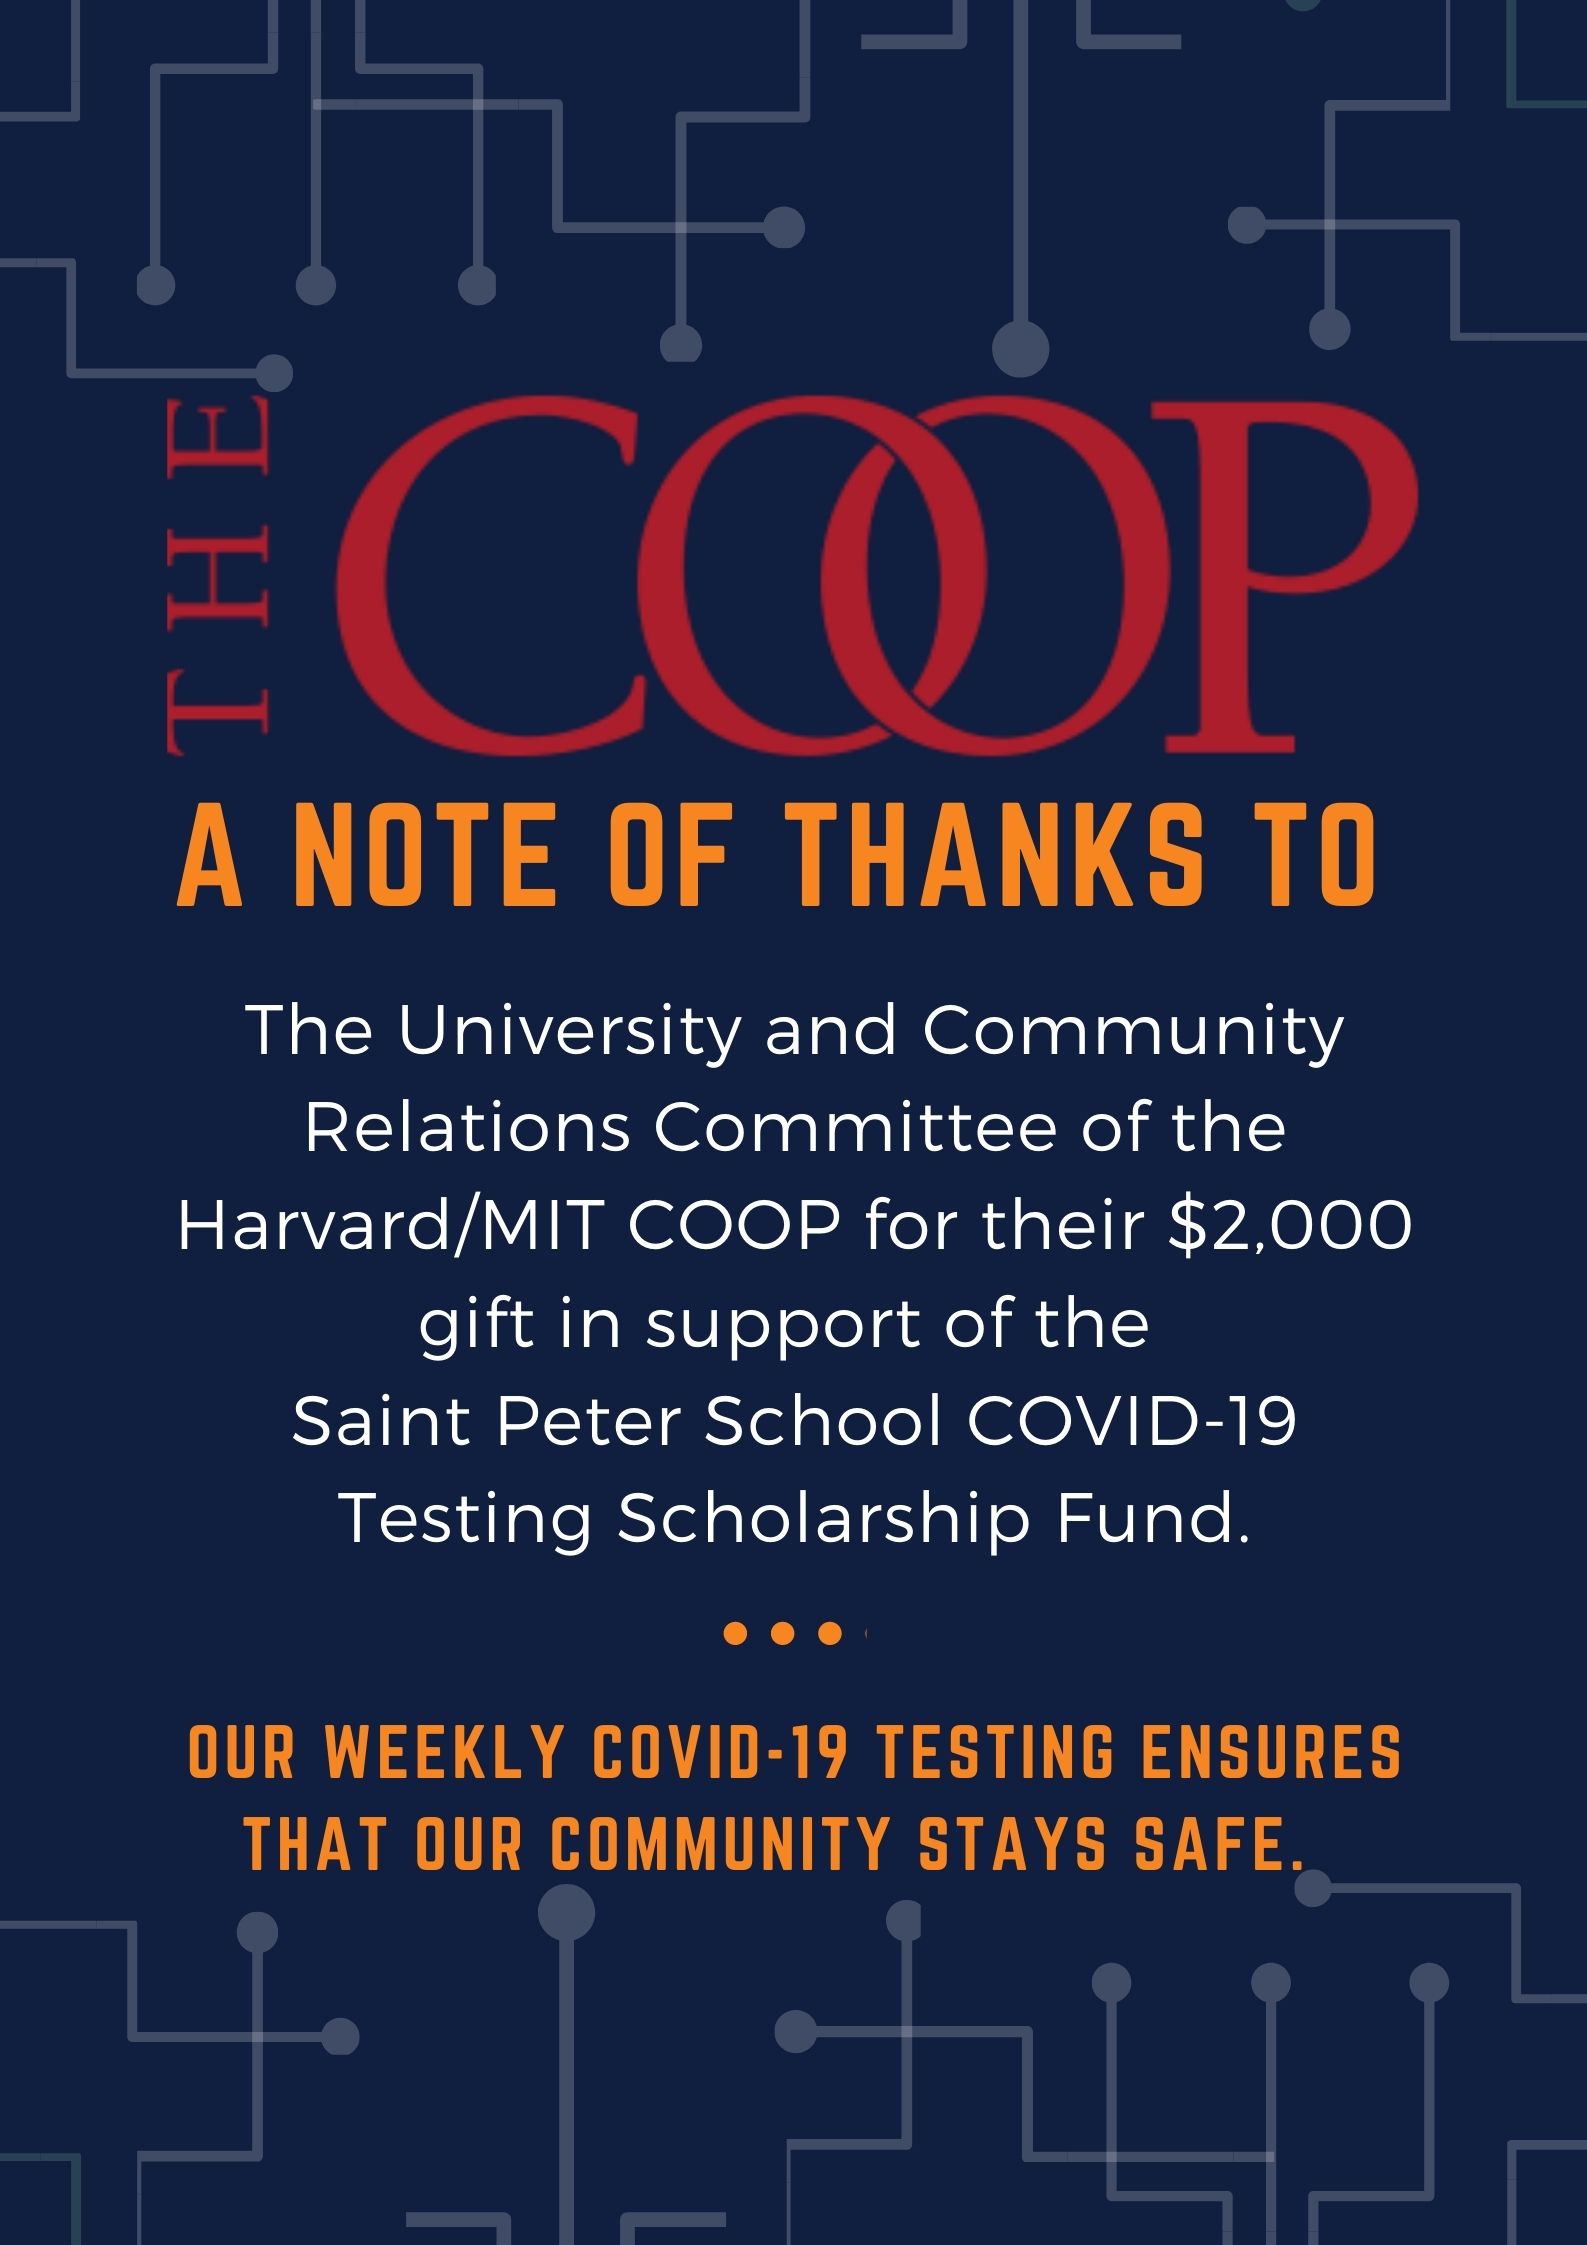 Thank you to the Harvard COOP for funding COVID testing